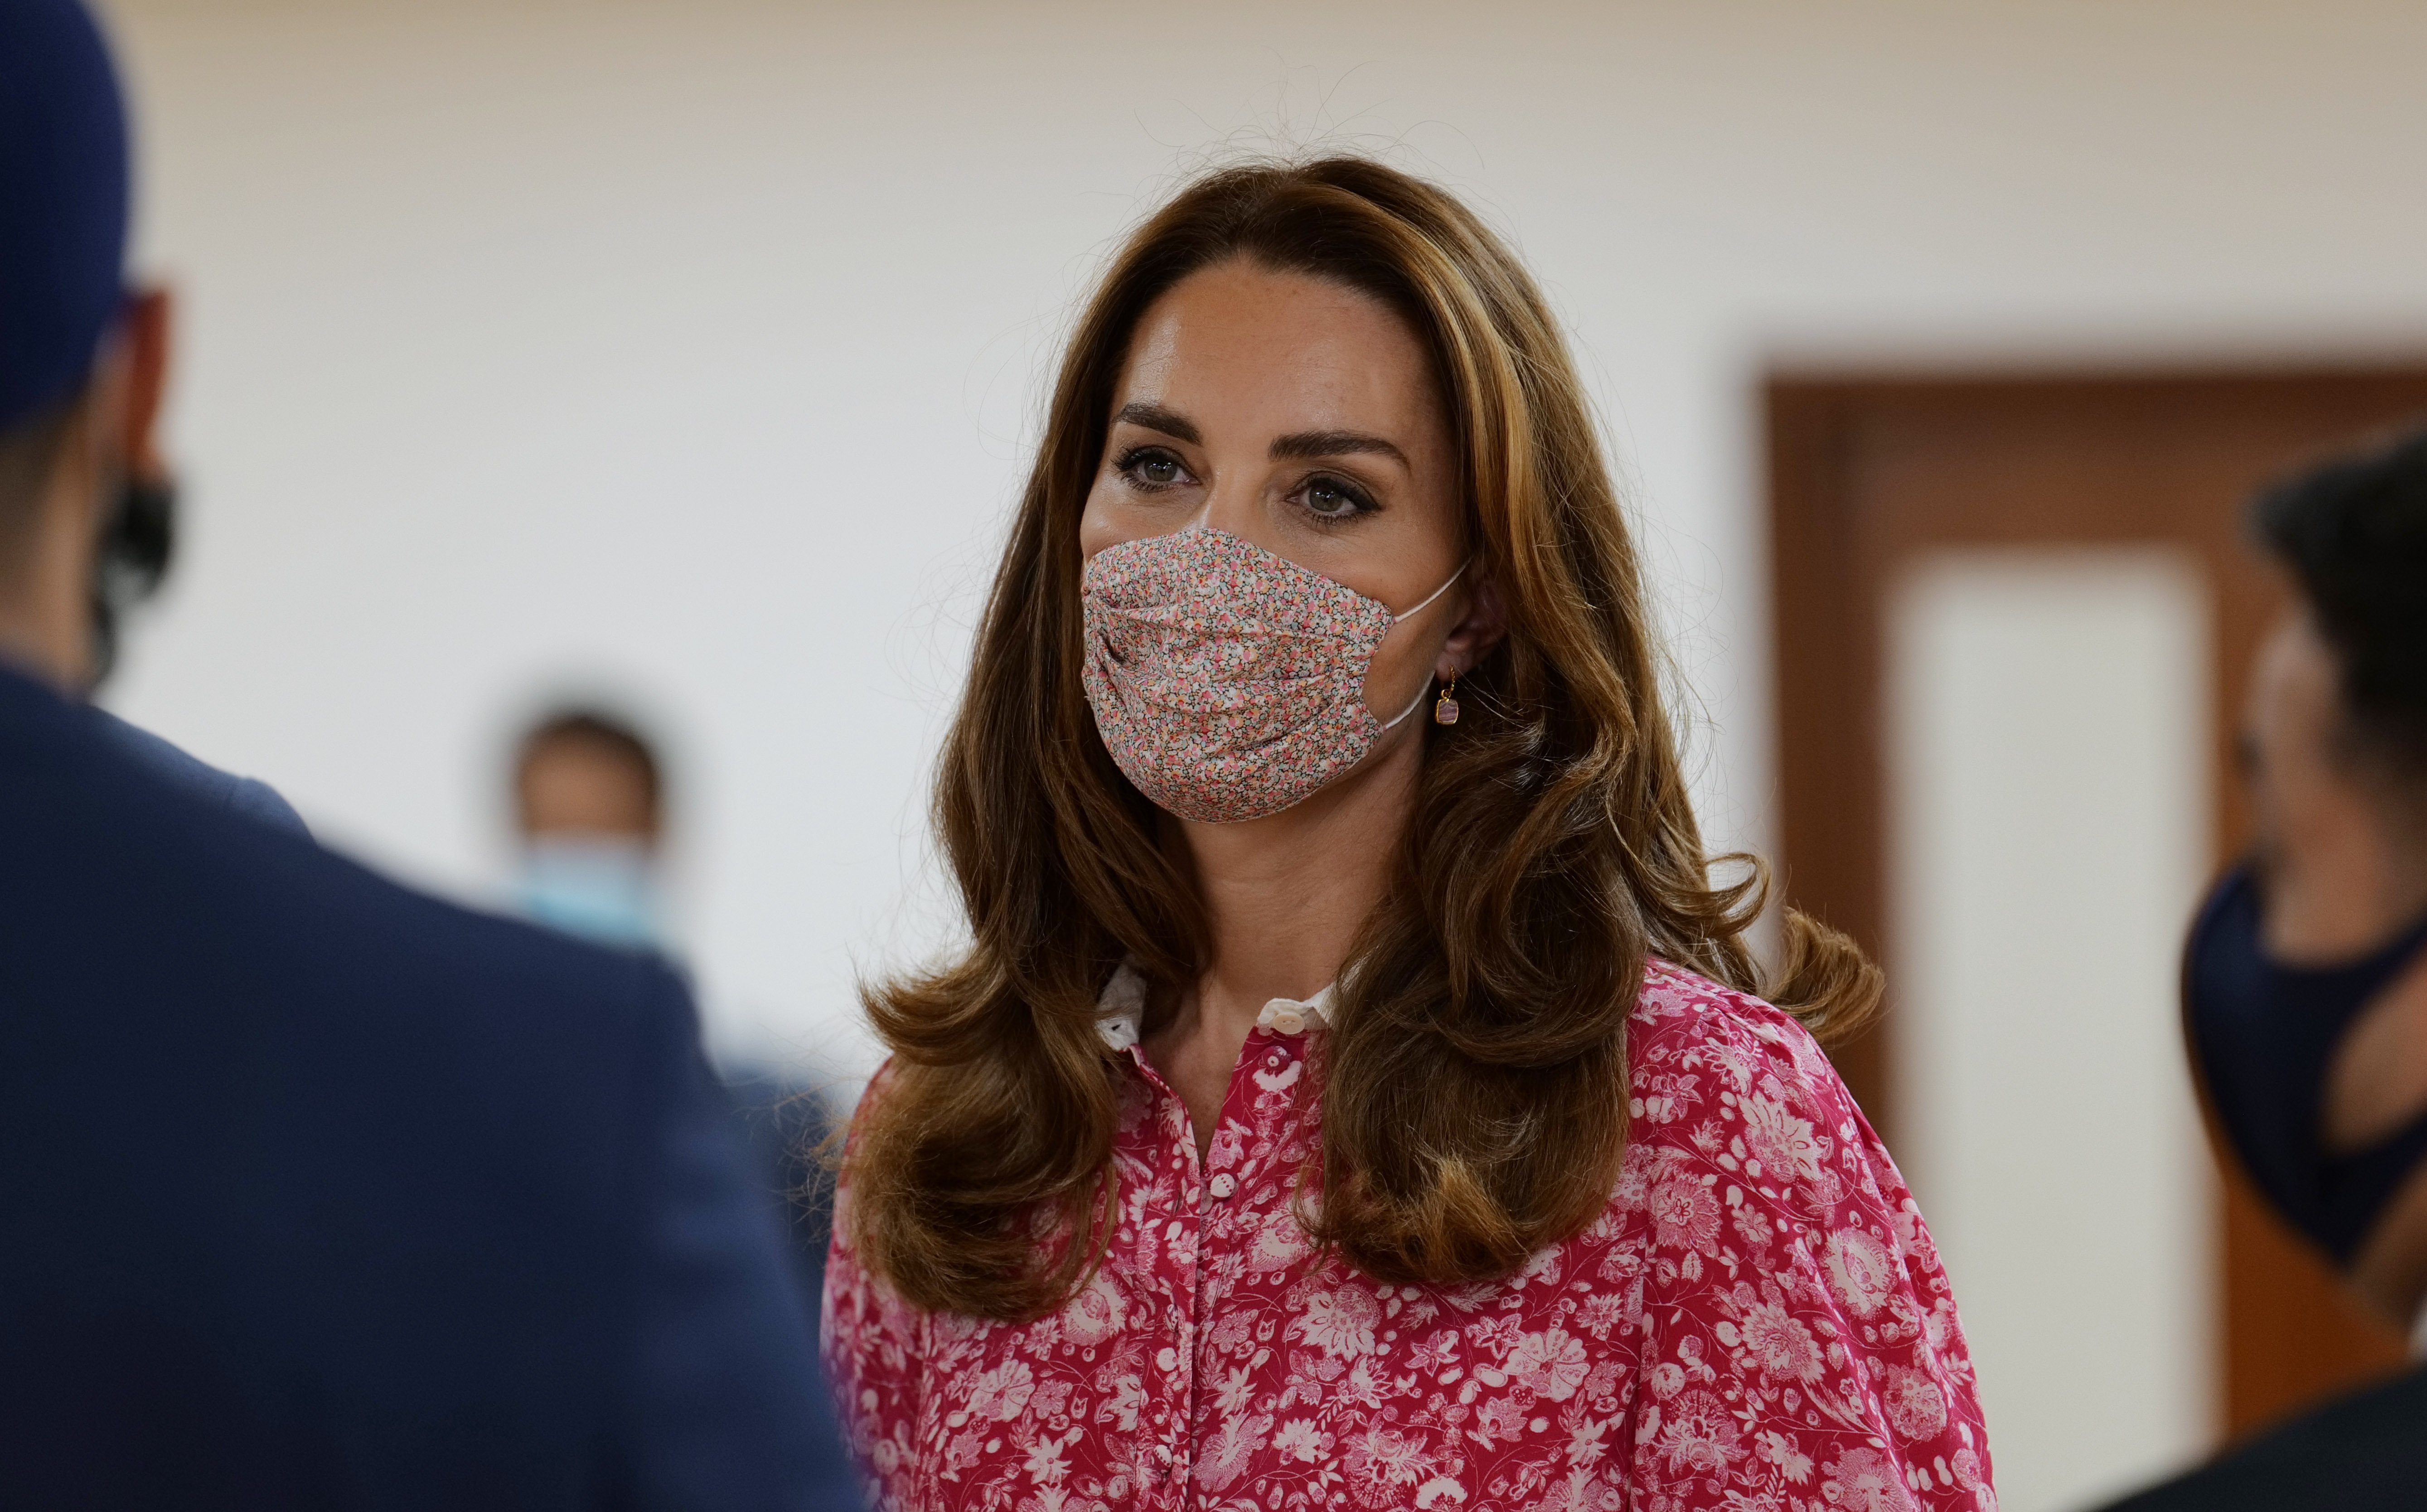 Kate Middleton during a visit to the East London Mosque on September 15, 2020, in London, England. | Source: Getty Images.